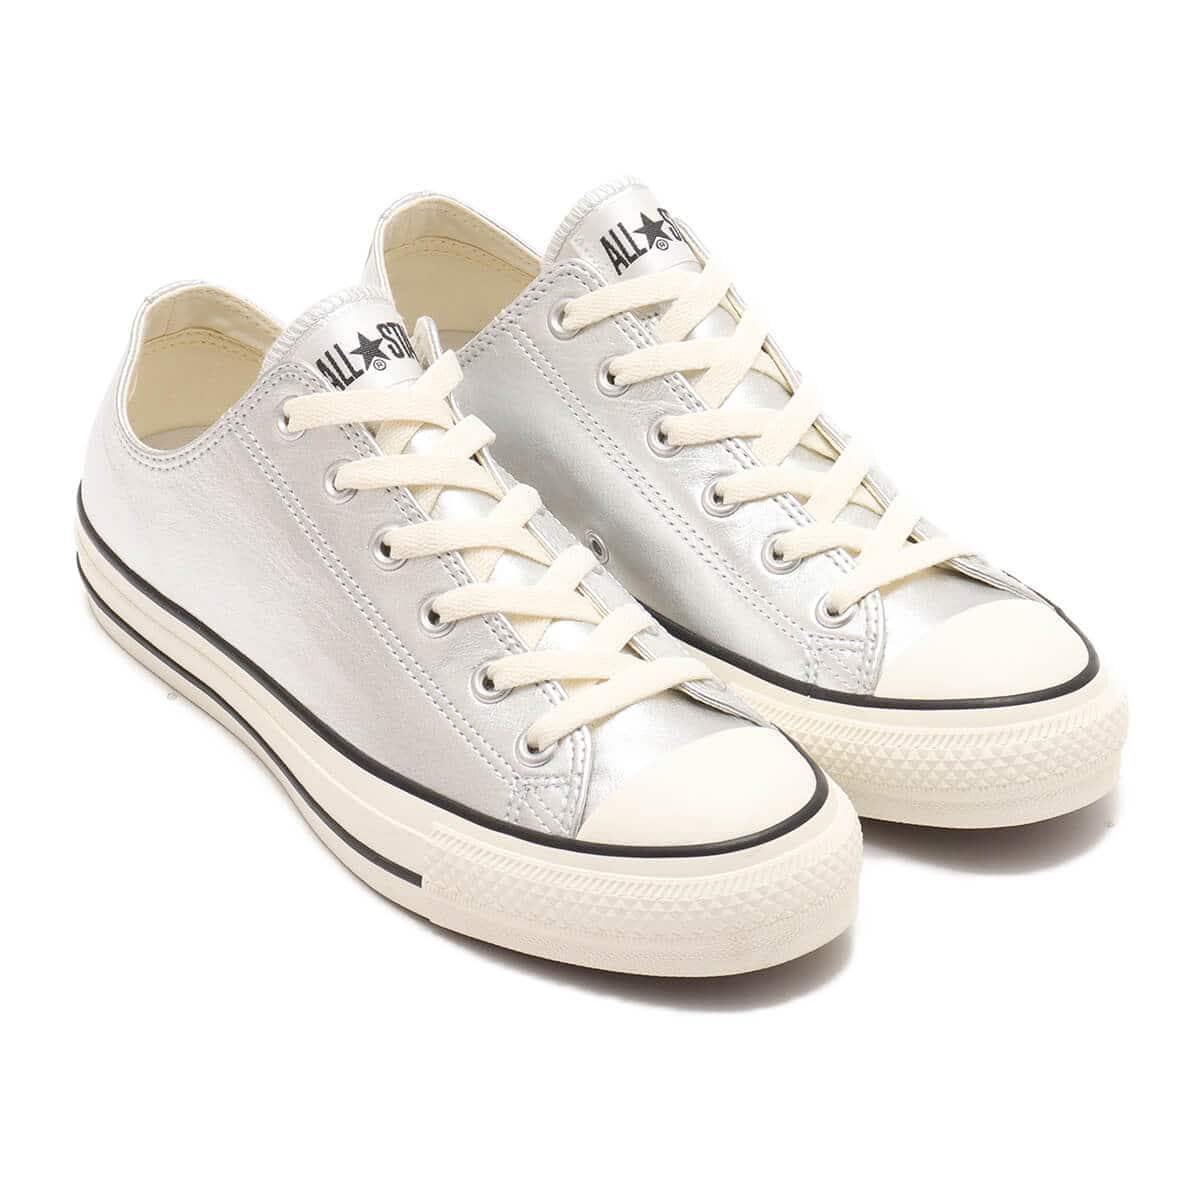 CONVERSE LEATHER ALL STAR(R) OX SILVER